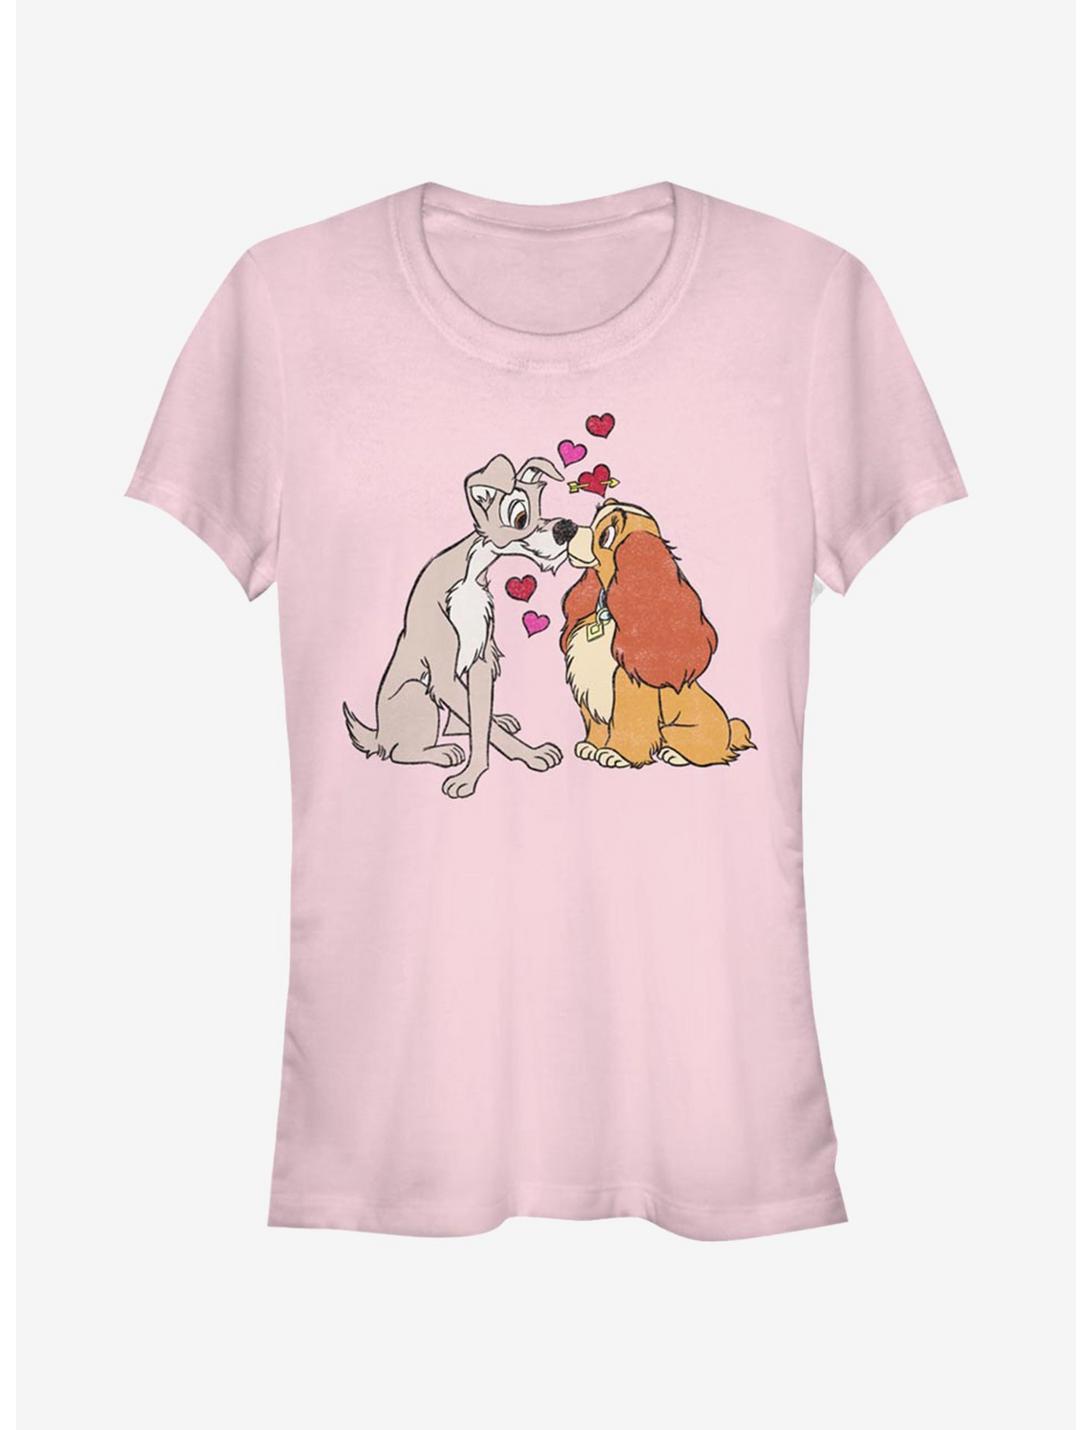 Disney Lady And The Tramp Puppy Love Girls T-Shirt, LIGHT PINK, hi-res